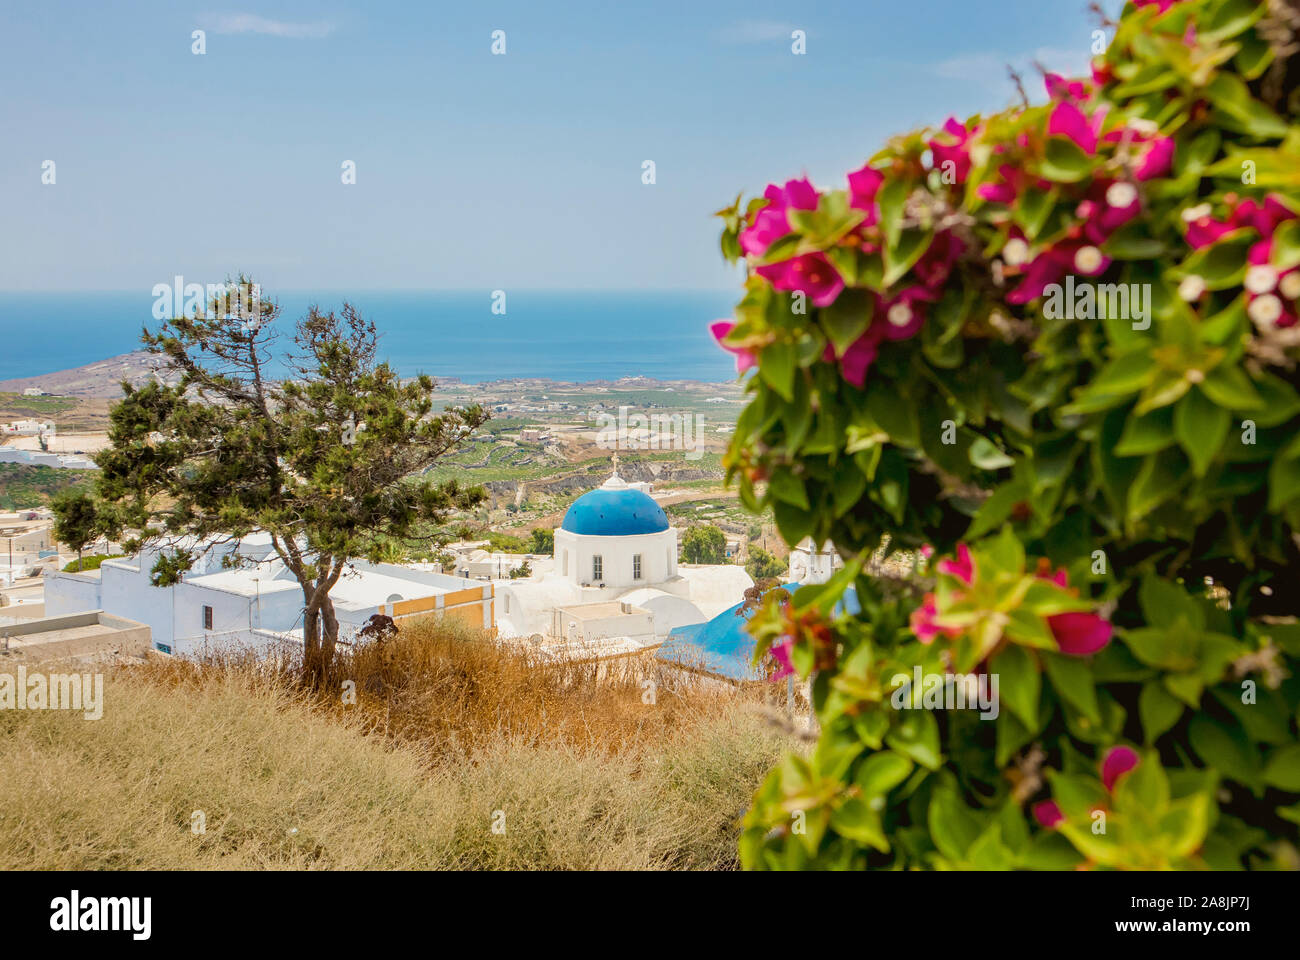 Top down view to village Pyrgos blue dome church on island of Santorini, Greece, green landscape and Aegean sea on the background. Stock Photo